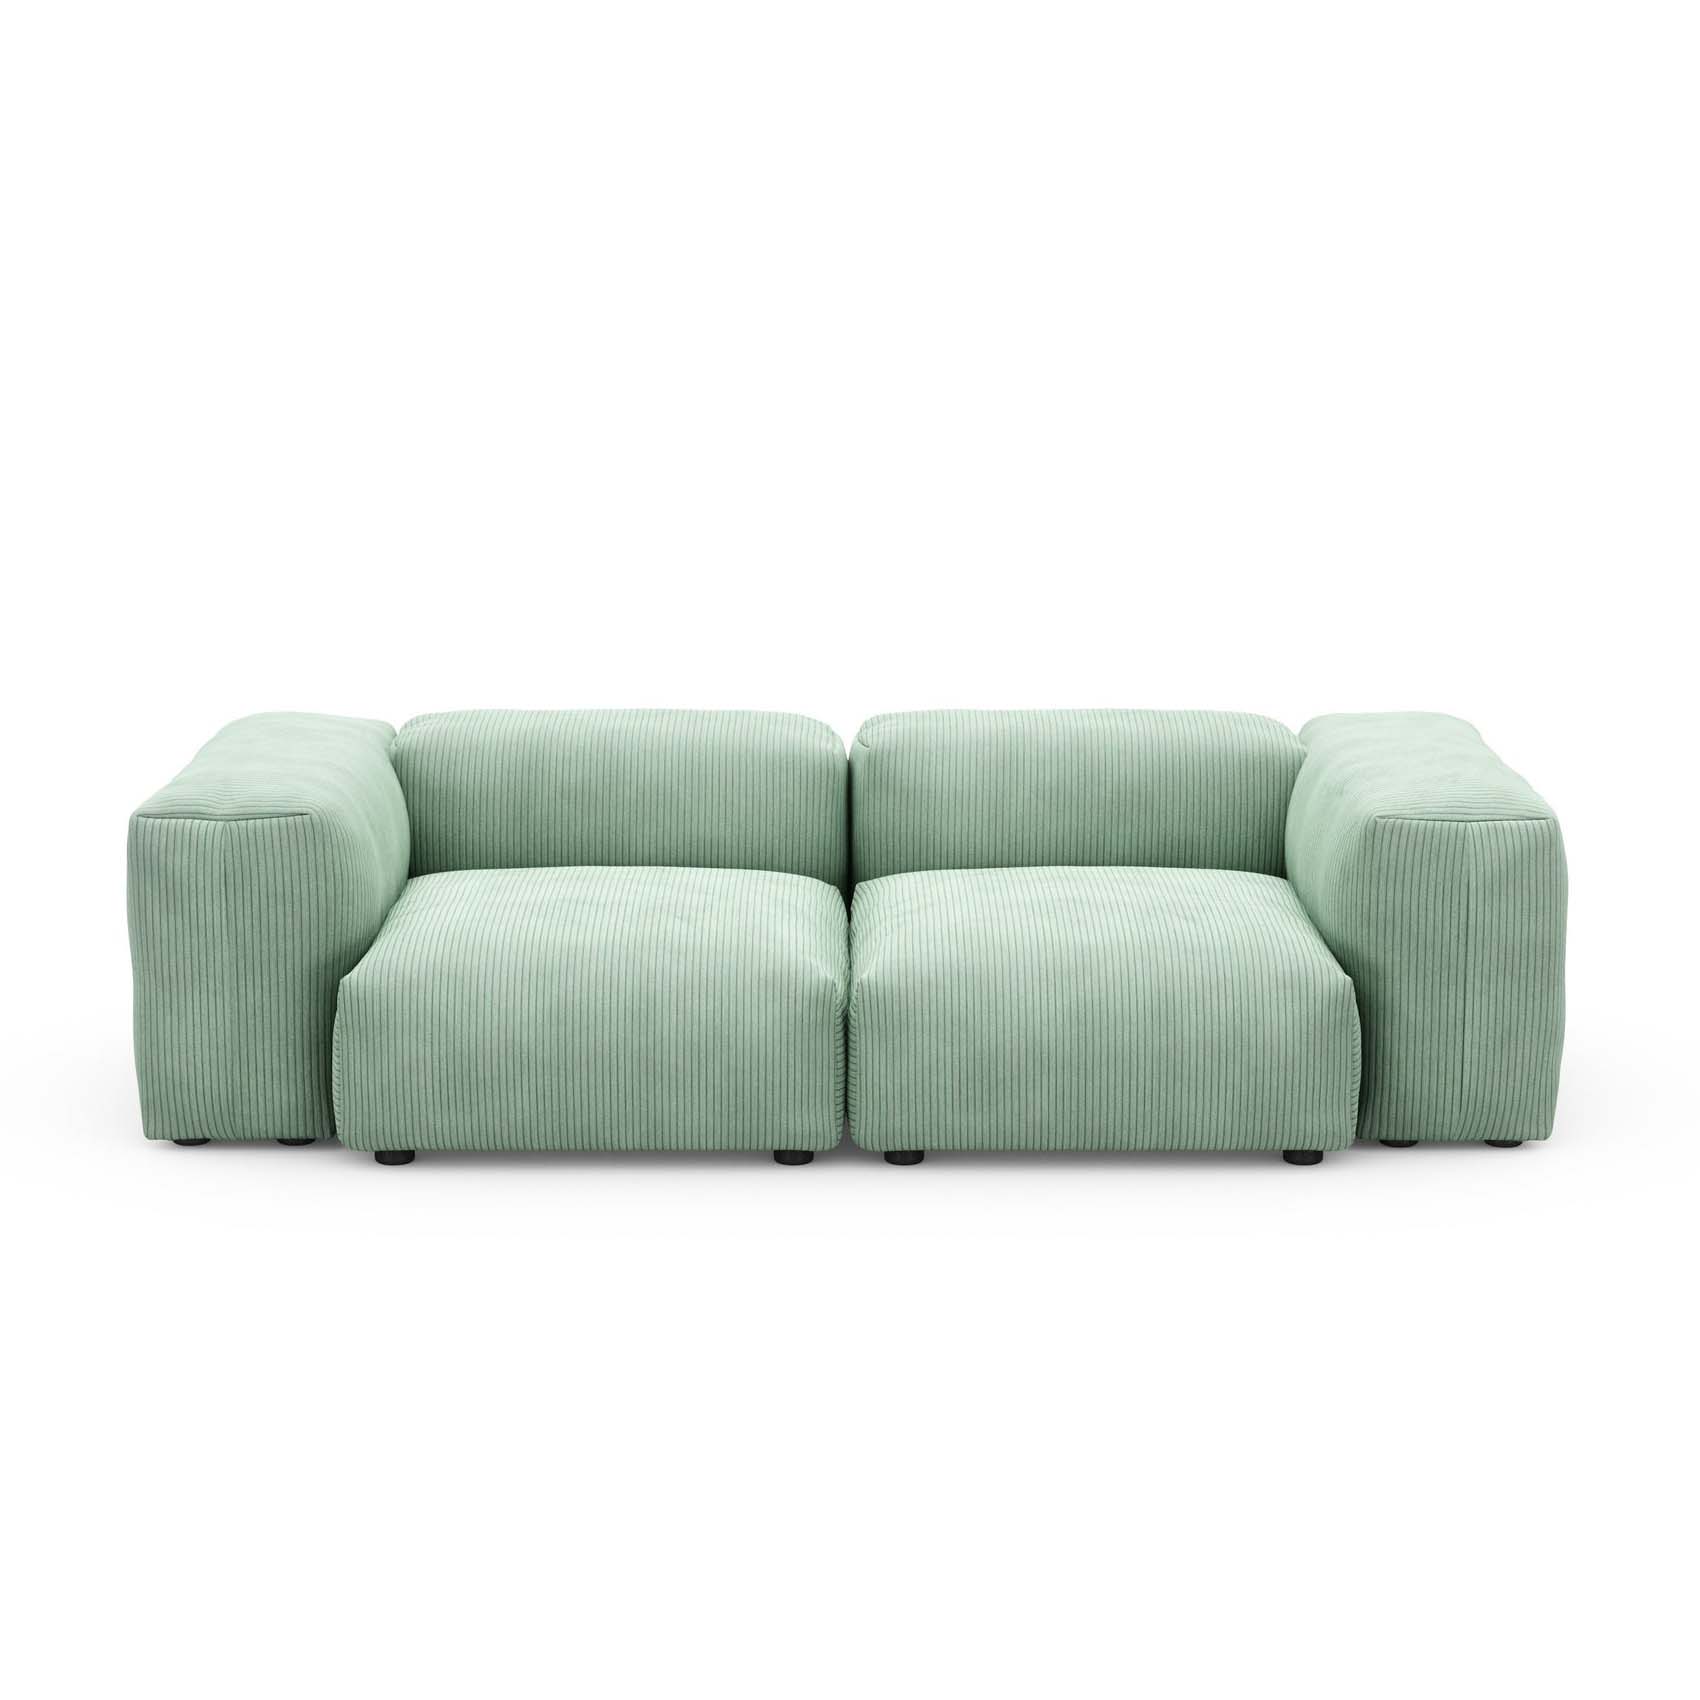 Two Seat Sofa S Cord Velours Duck Egg